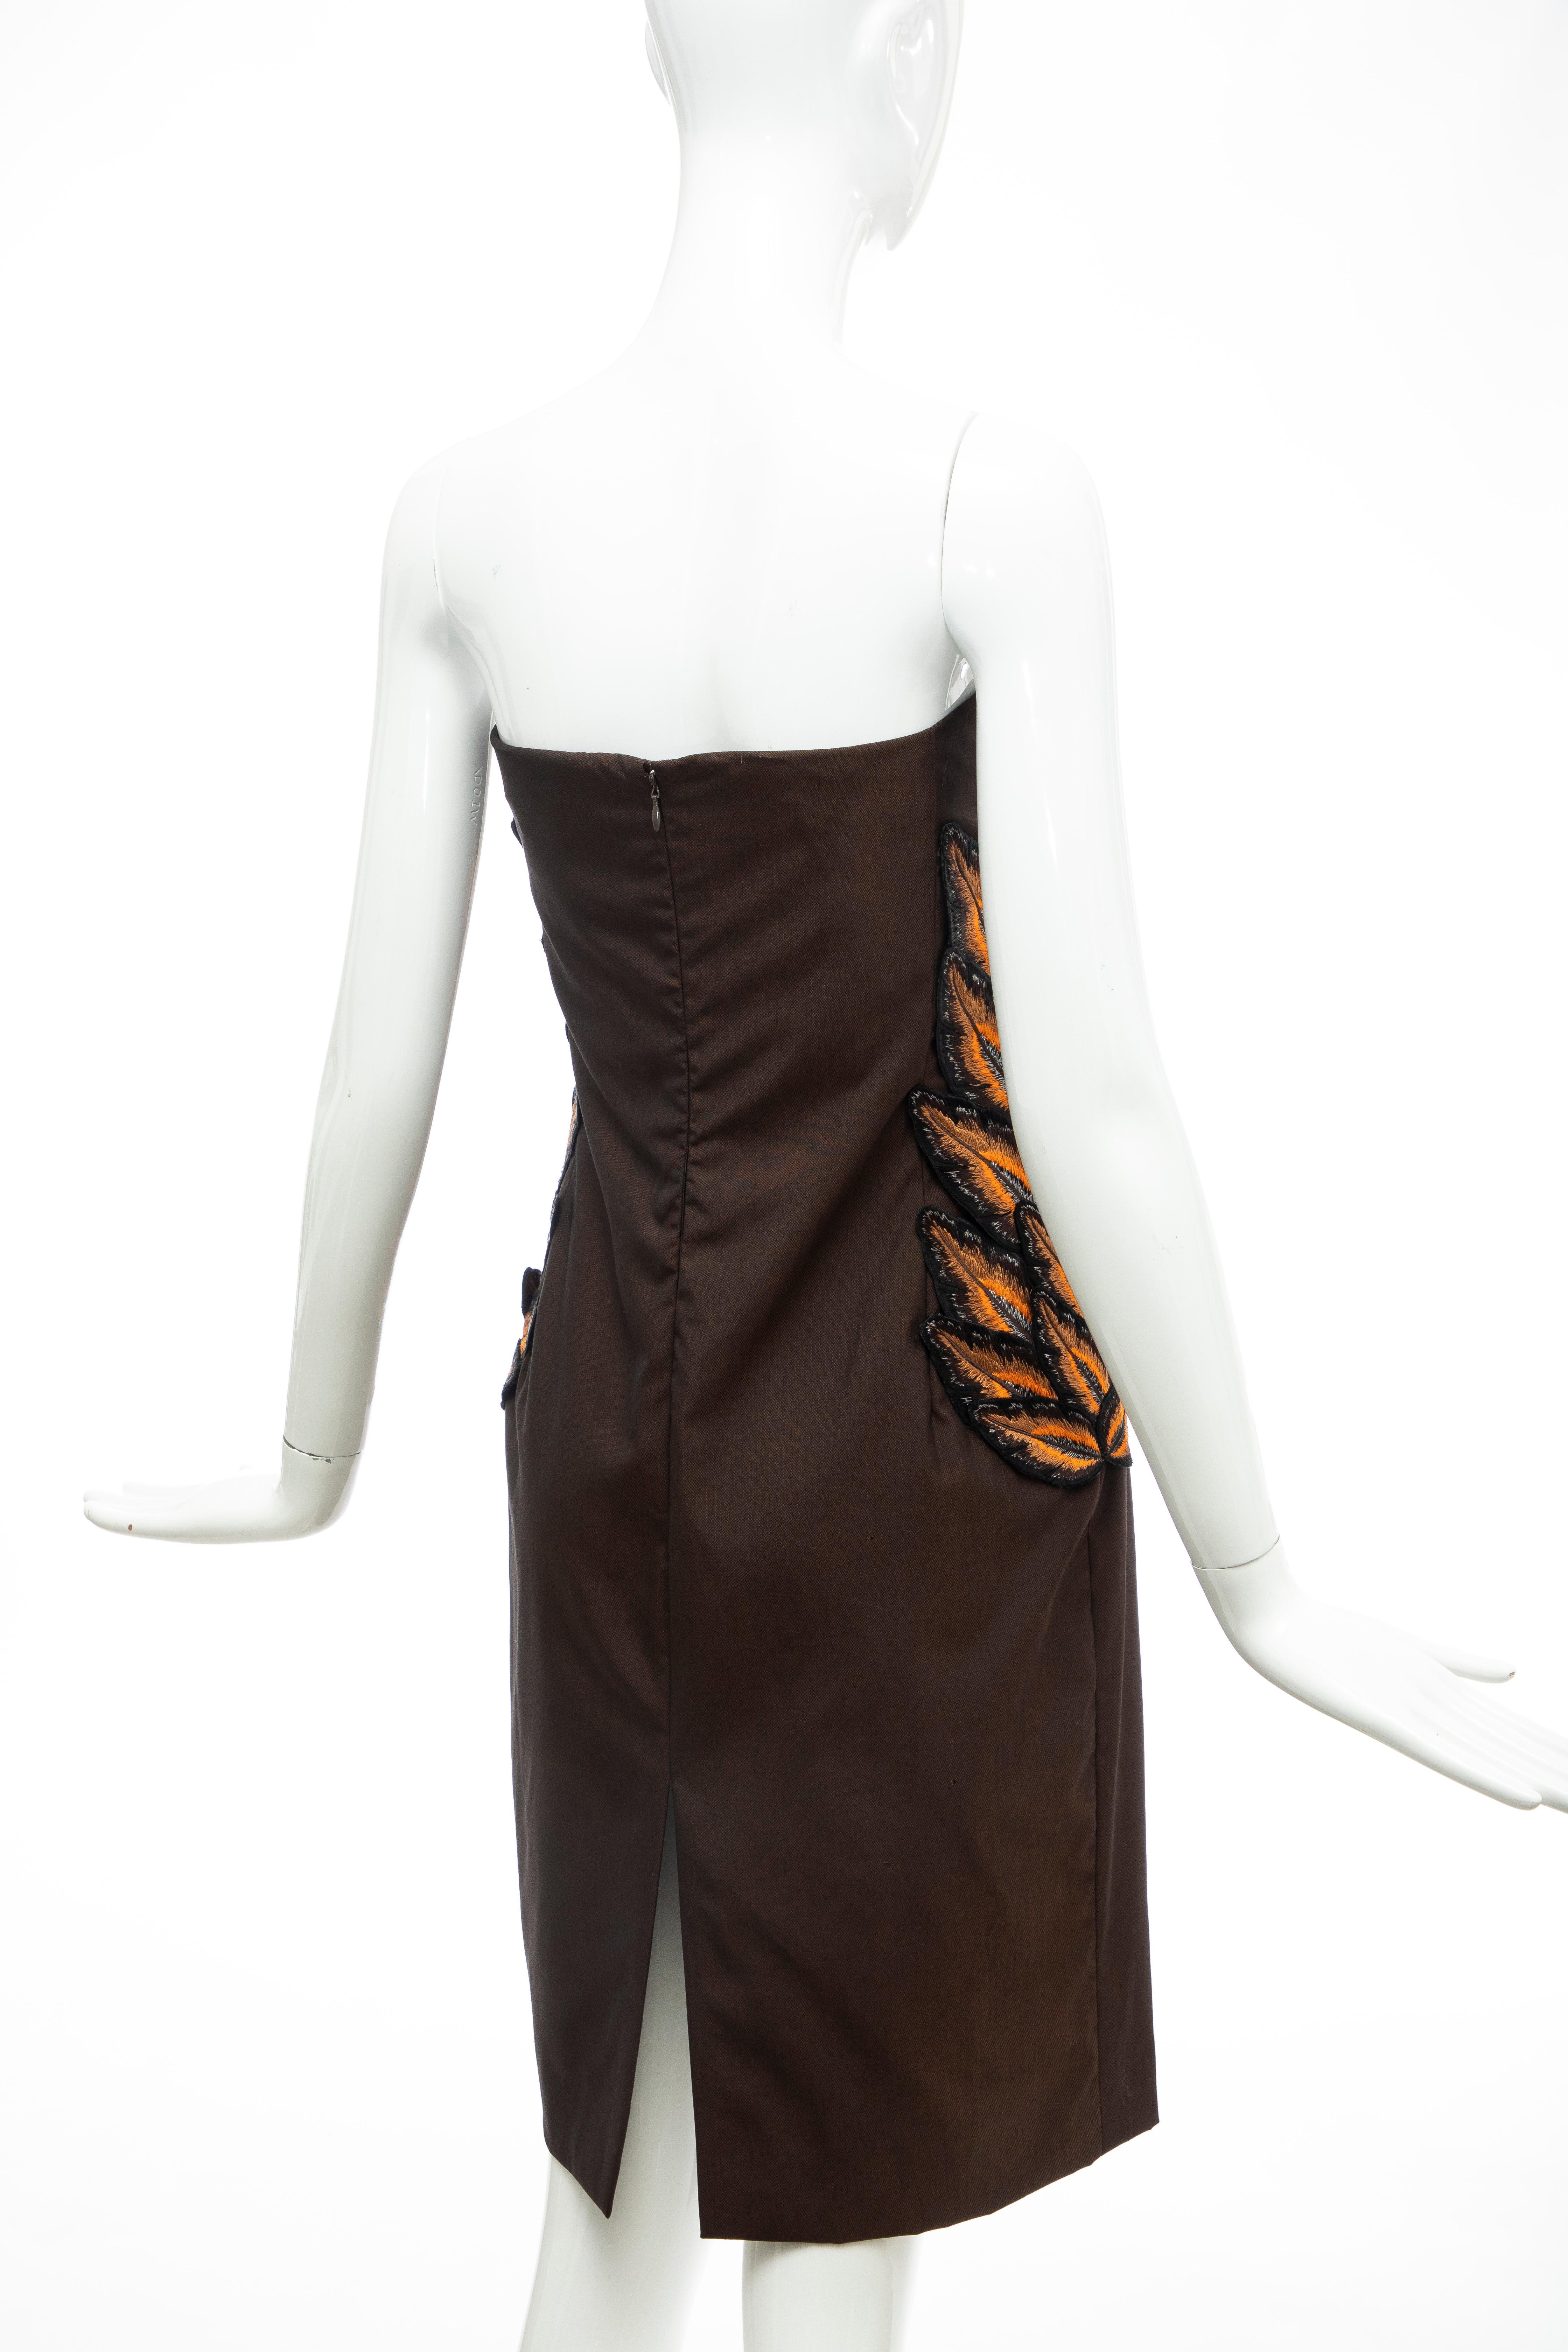 Alexander McQueen Givenchy Couture Strapless Wool Embroidered Dress, Spring 1998 For Sale 5